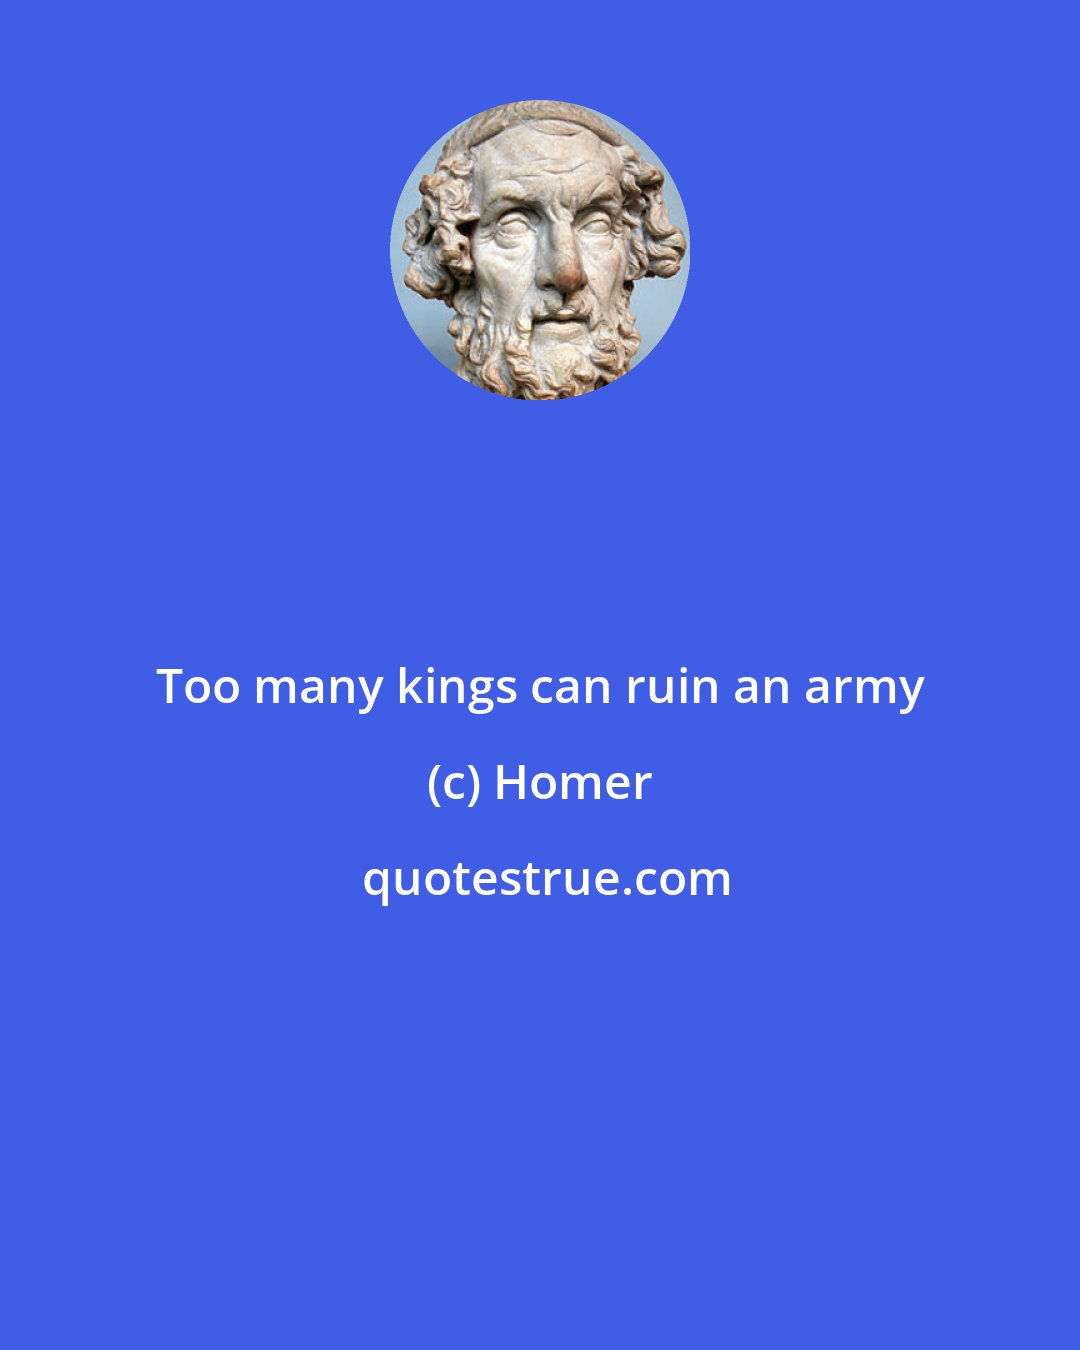 Homer: Too many kings can ruin an army